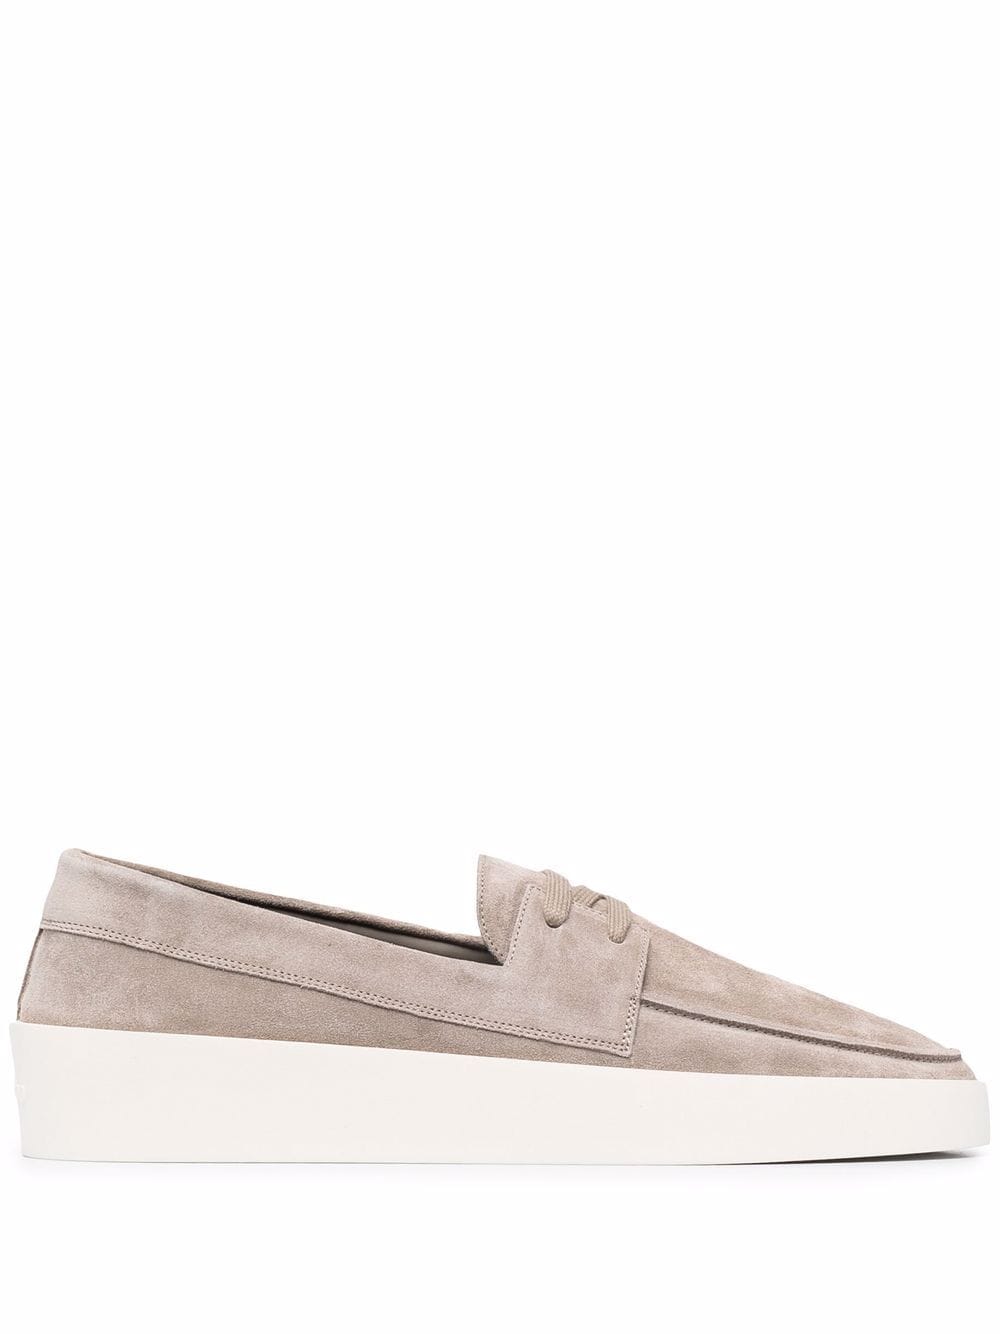 FEAR OF GOD Laced Suede Loafers Brown